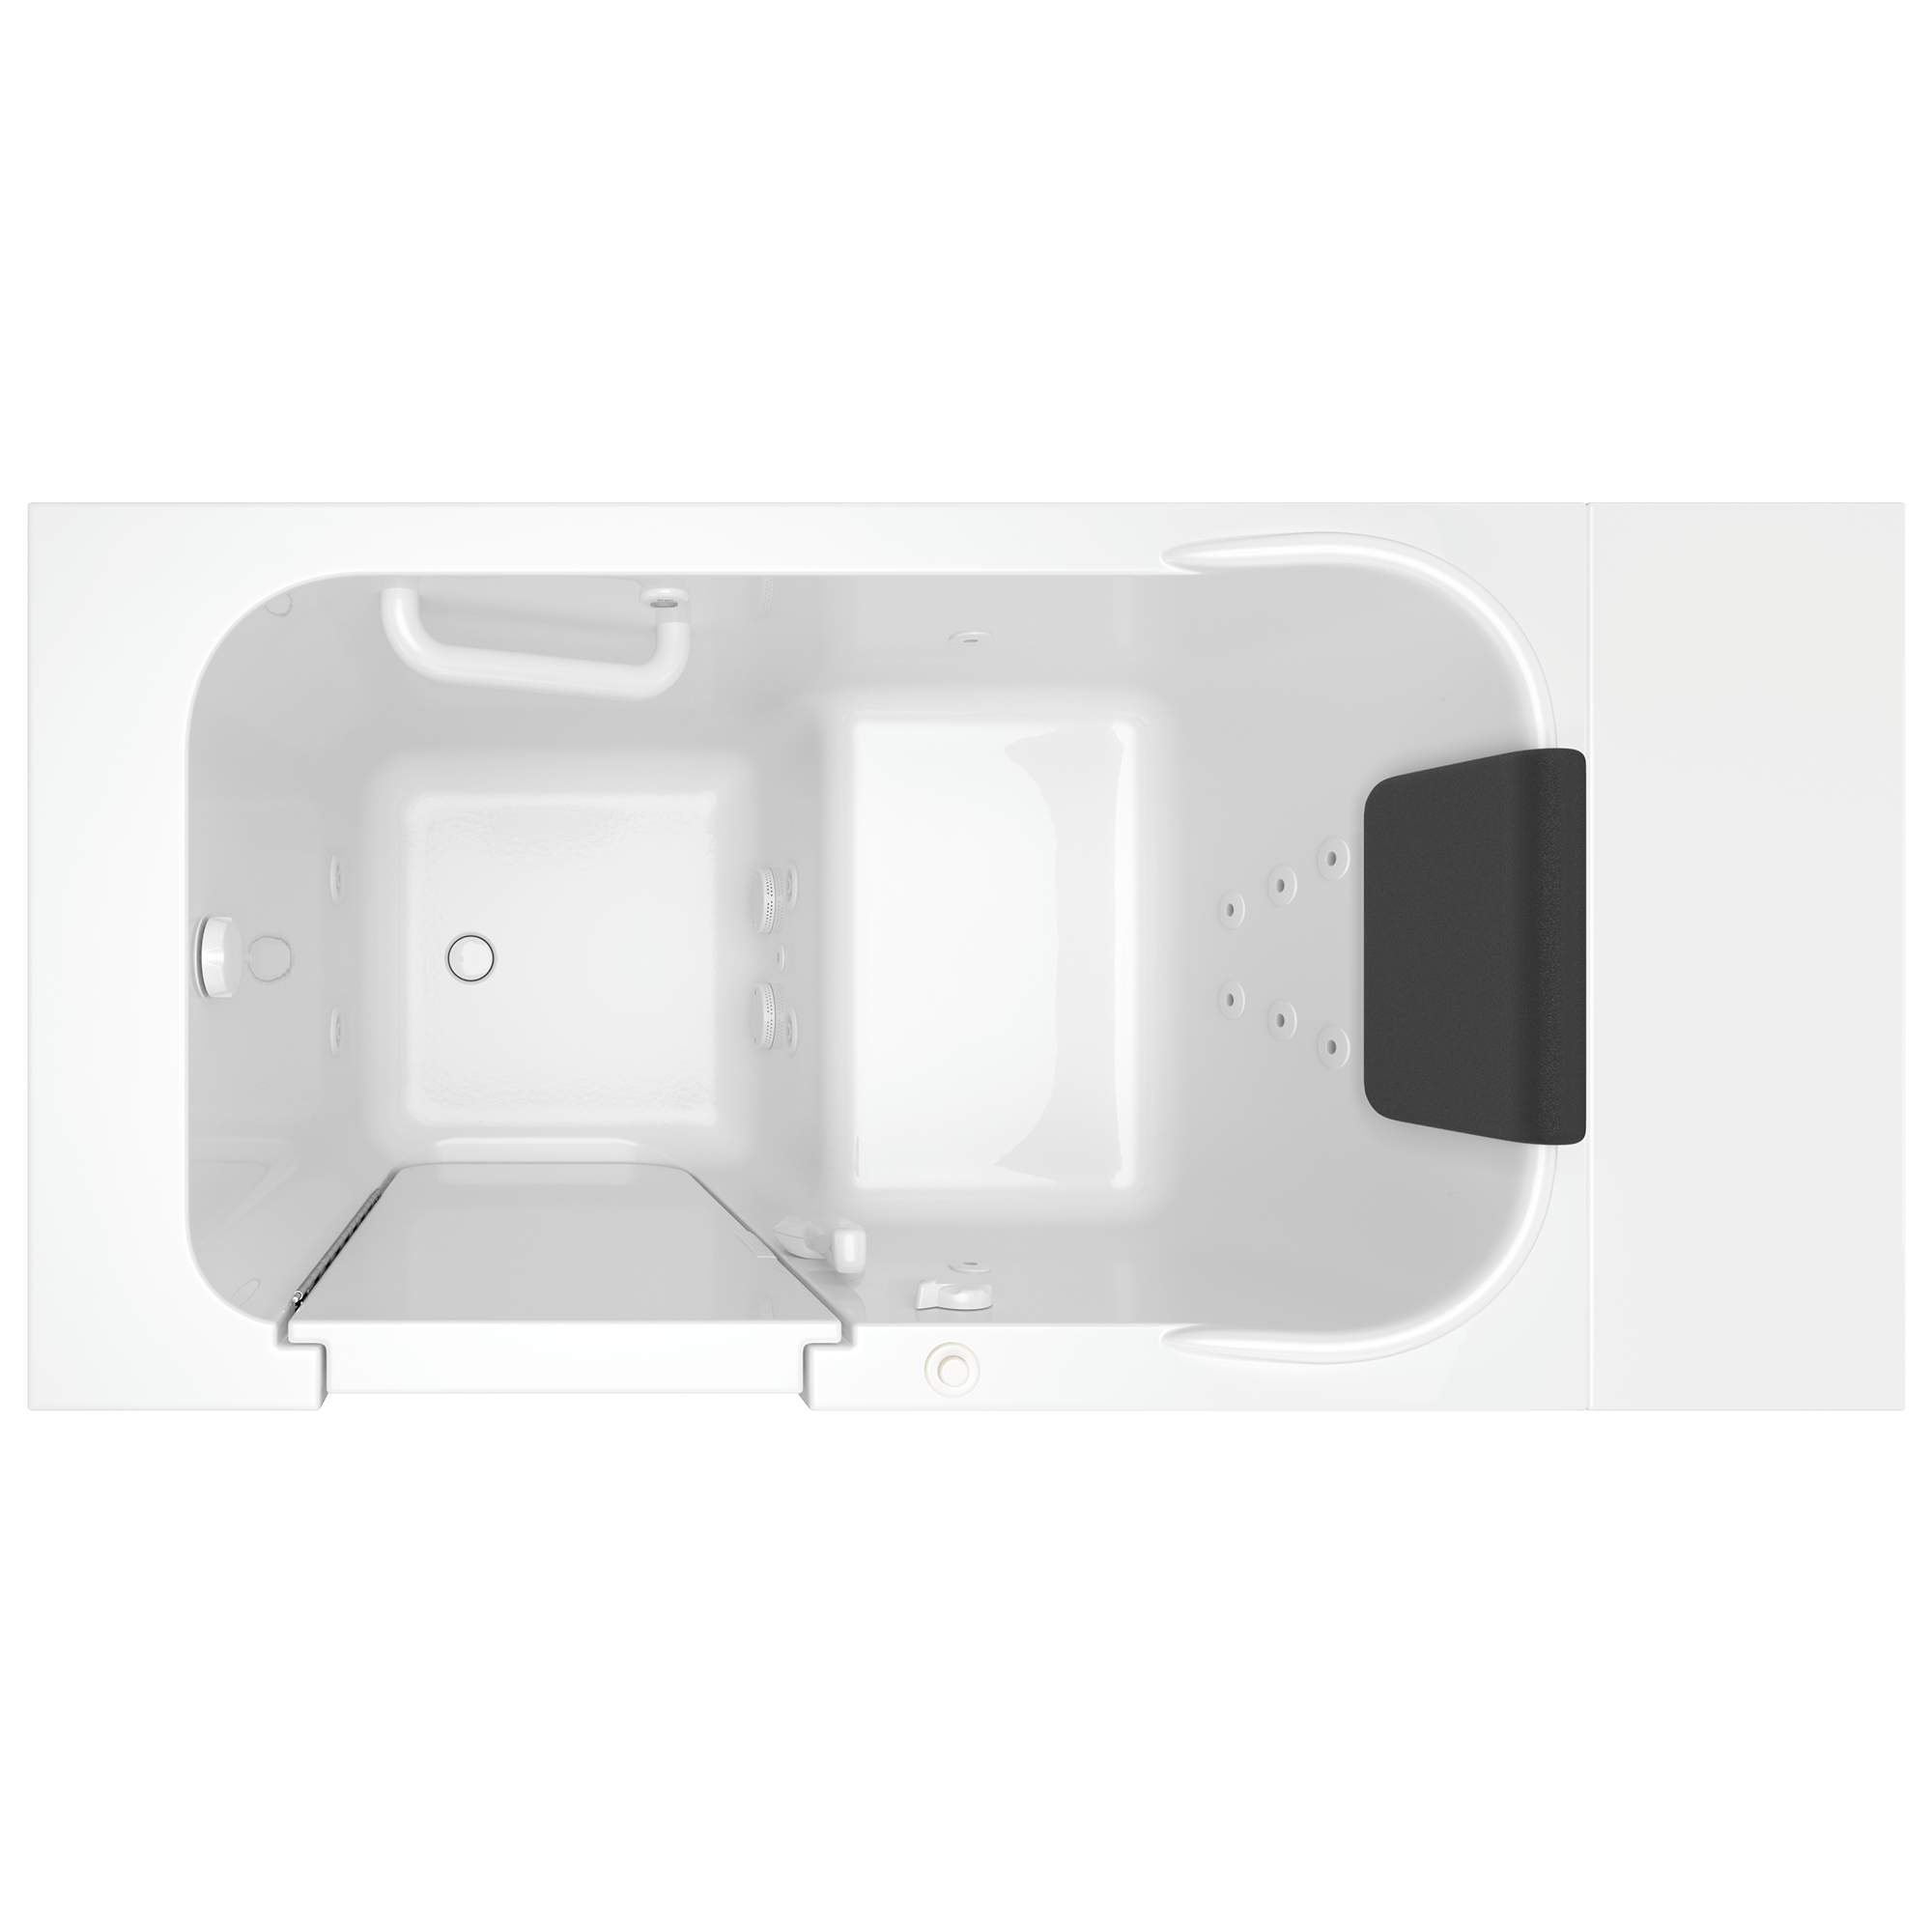 Gelcoat Premium Series 28 x 48 Inch Walk in Tub With Whirlpool System   Left Hand Drain WIB WHITE